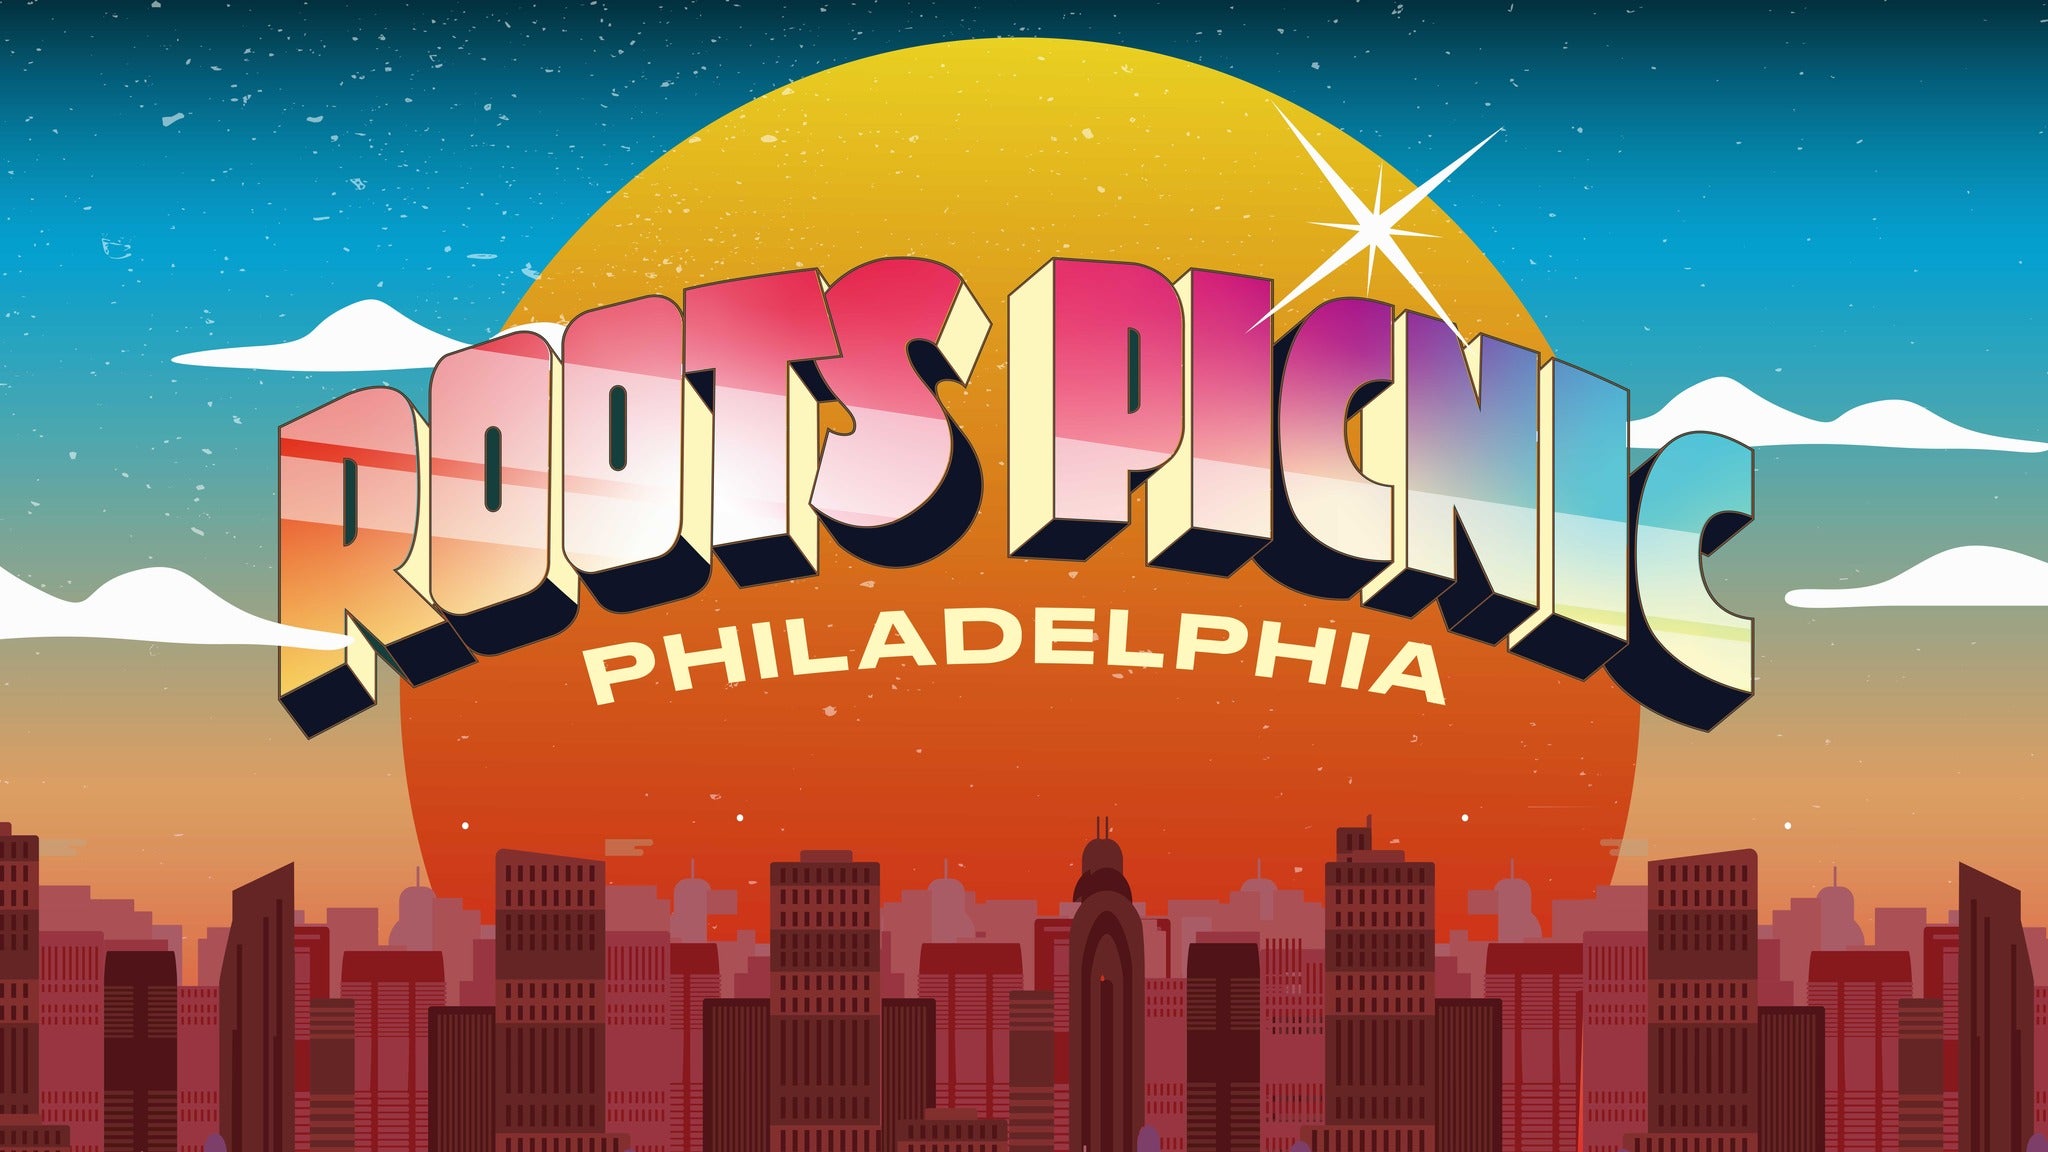 The Roots Picnic in Philadelphia promo photo for Consequence of Sound presale offer code